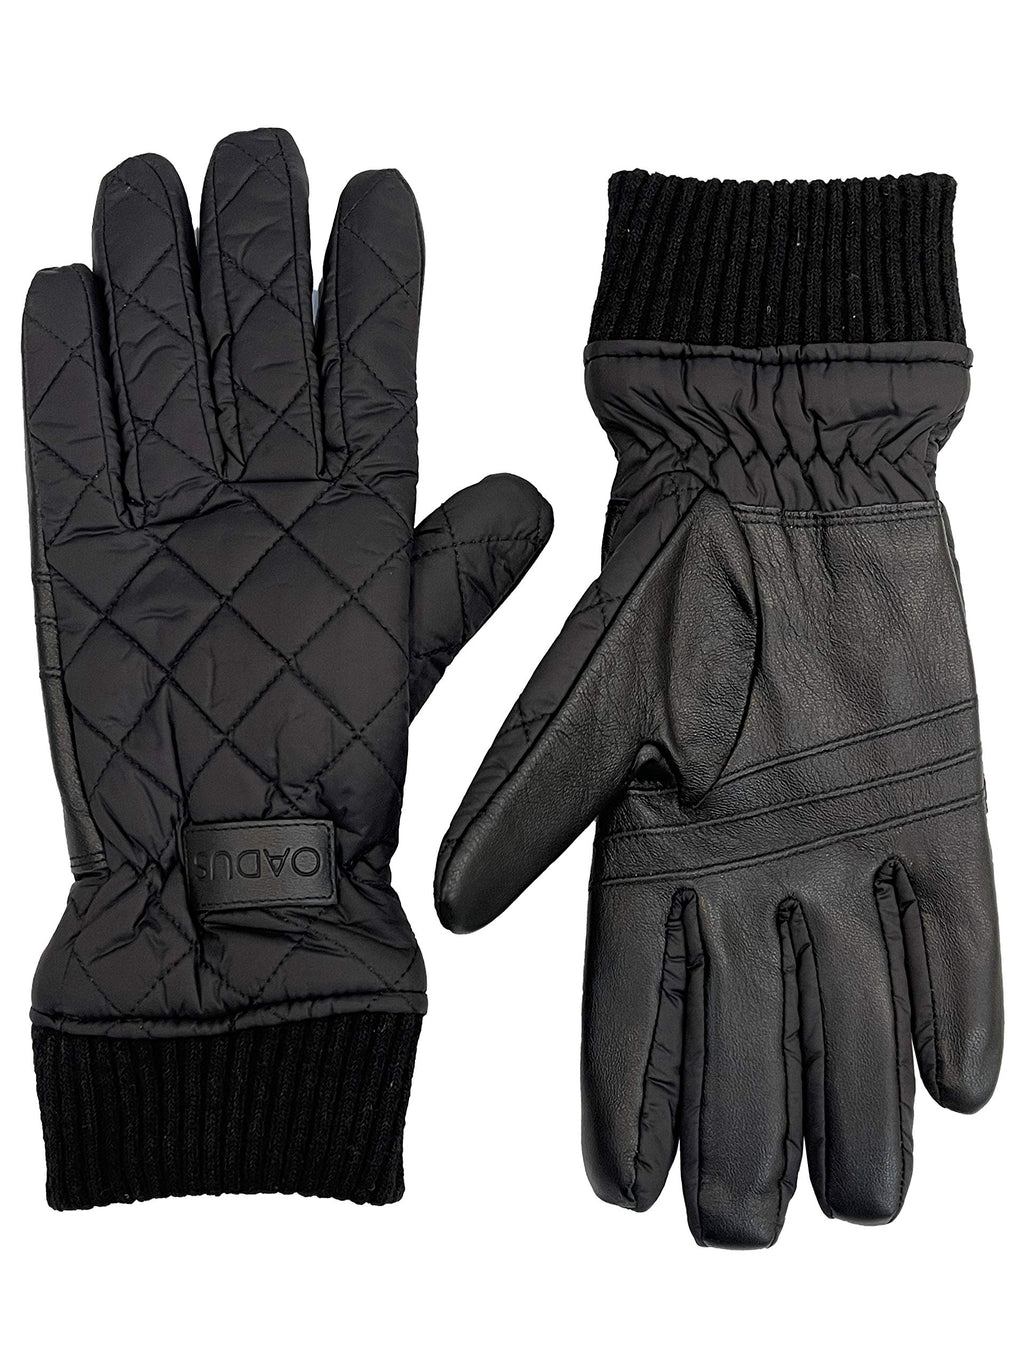 [Australia] - OADUS Unisex Quilted Nylon Warm Winter Gloves with Leather Touchscreen Texting Technology and Thinsulate Insulation Small Black 